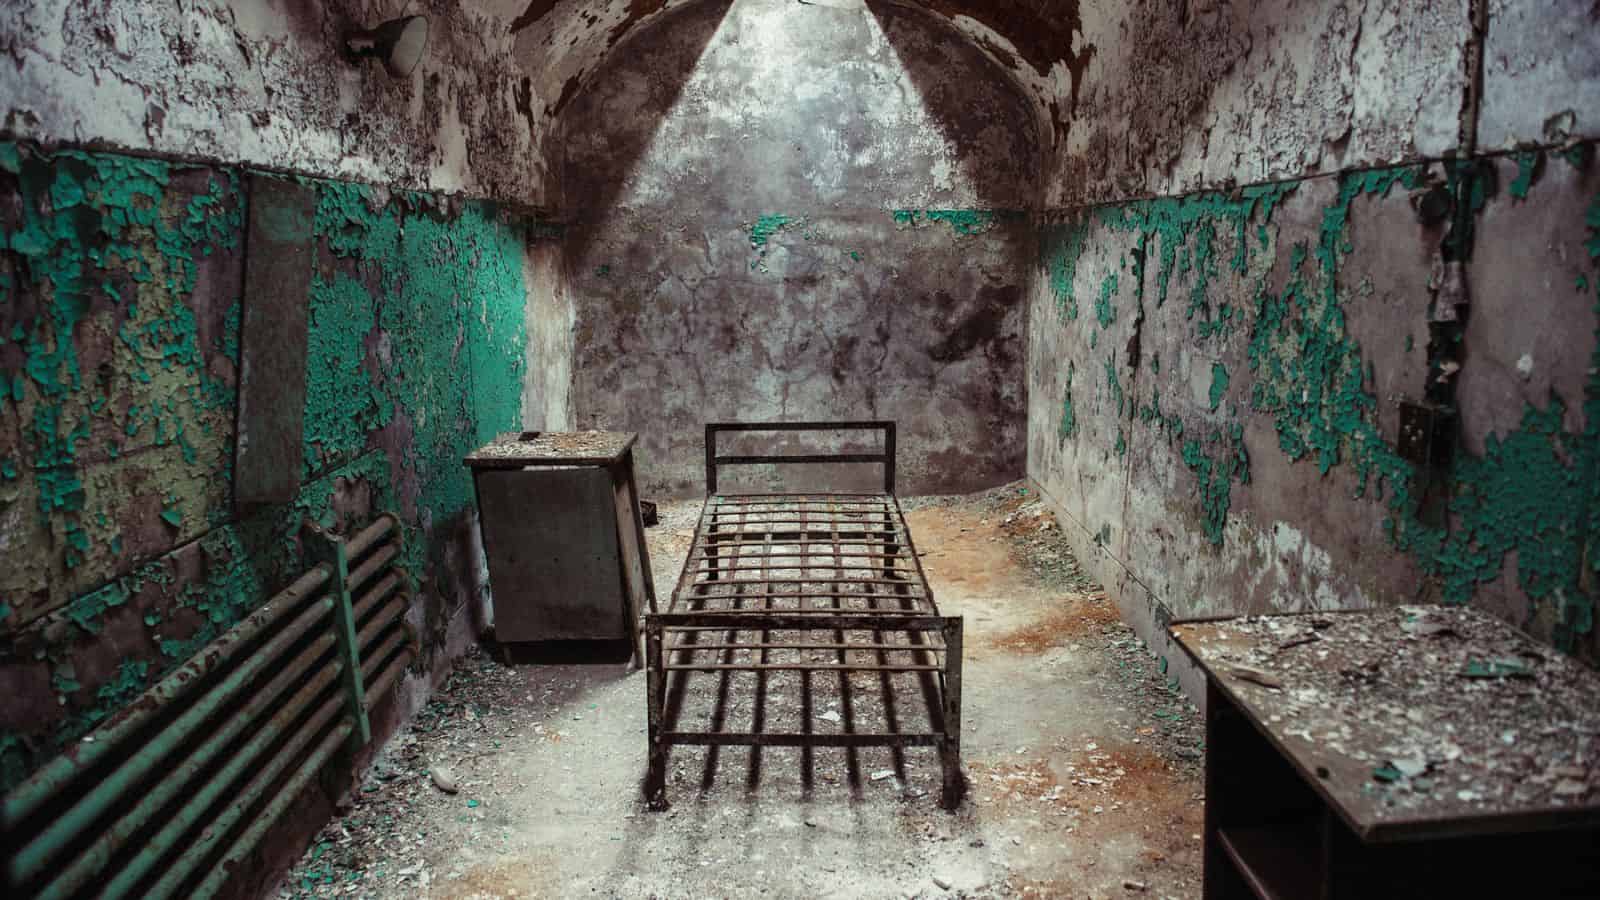 <p><span>Al Capone’s luxury suite comes with whispers of past inmates and echoing footsteps included in the price of admission. </span></p><p><span>Phantoms don’t pay rent, but they certainly do linger like awkward guests. If you listen carefully, you’ll swear you can hear the clink of ghostly shackles down the corridor.</span></p>